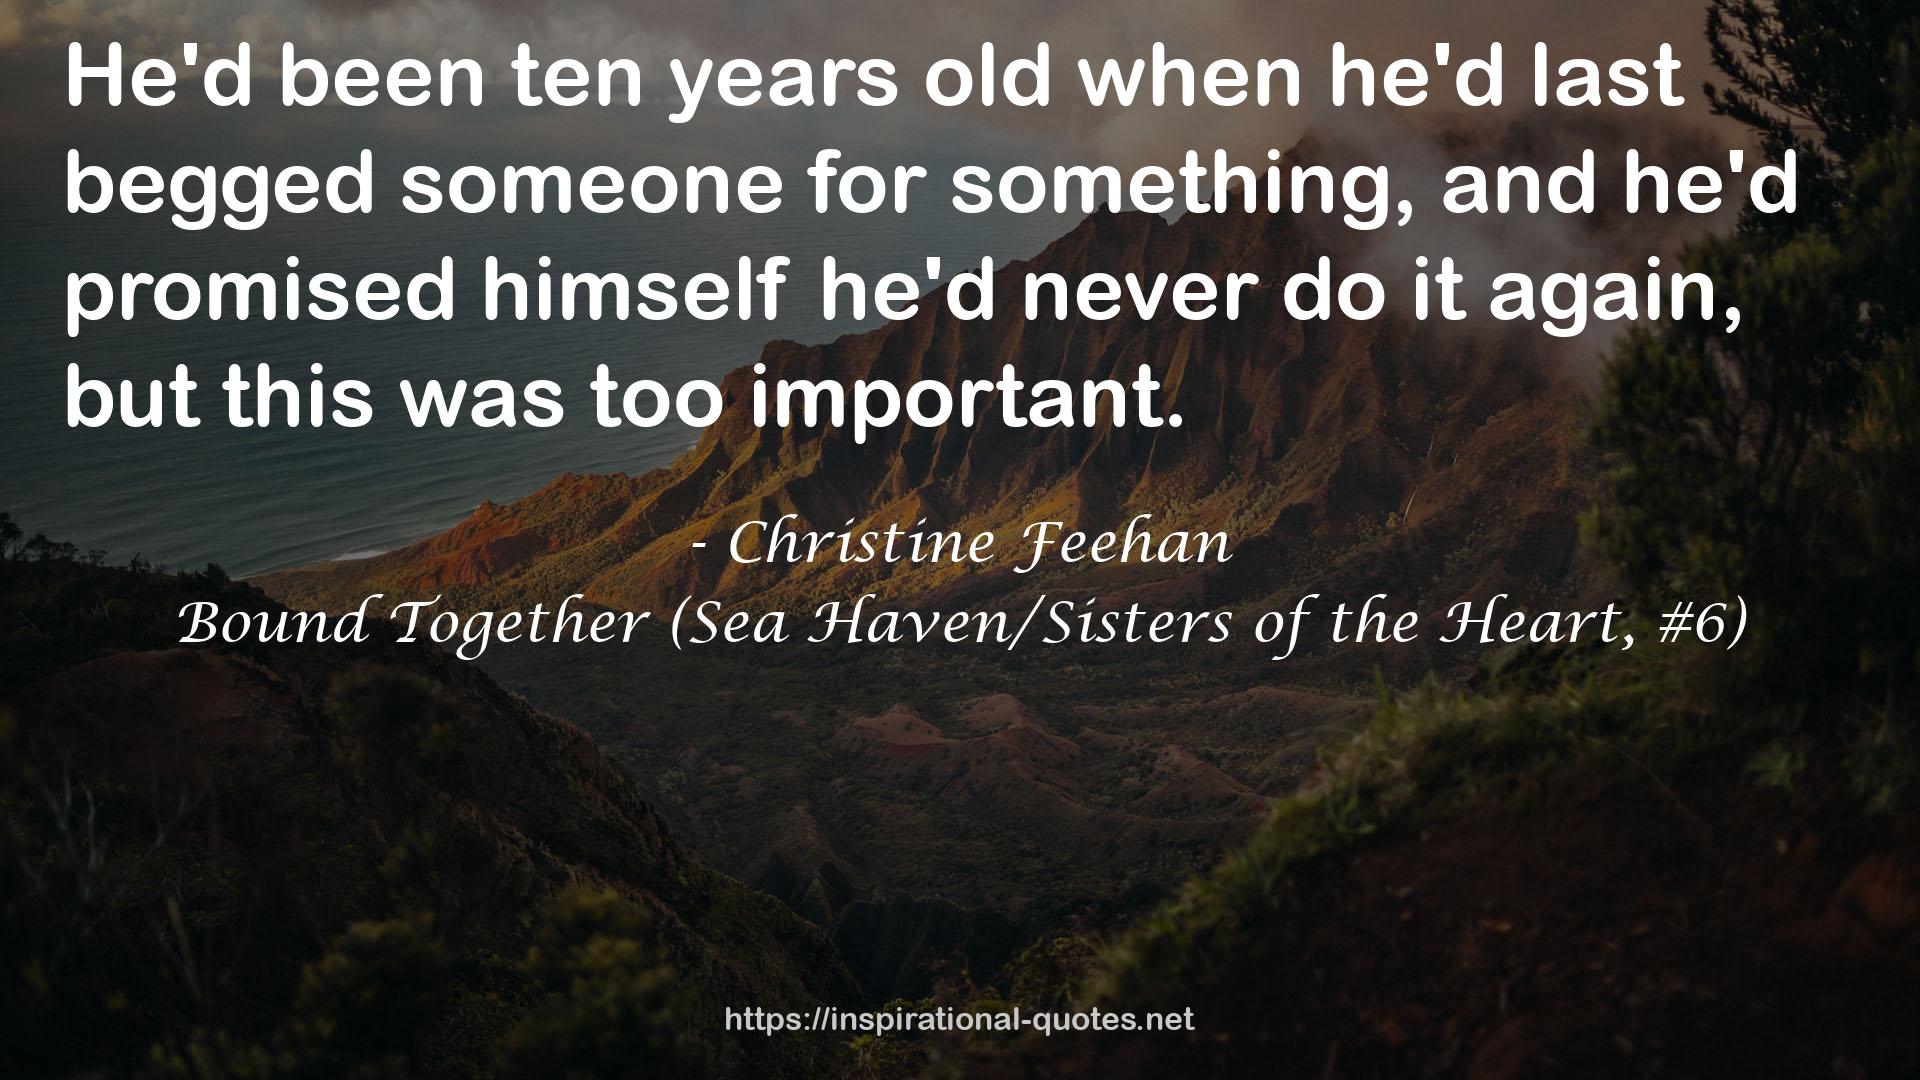 Bound Together (Sea Haven/Sisters of the Heart, #6) QUOTES